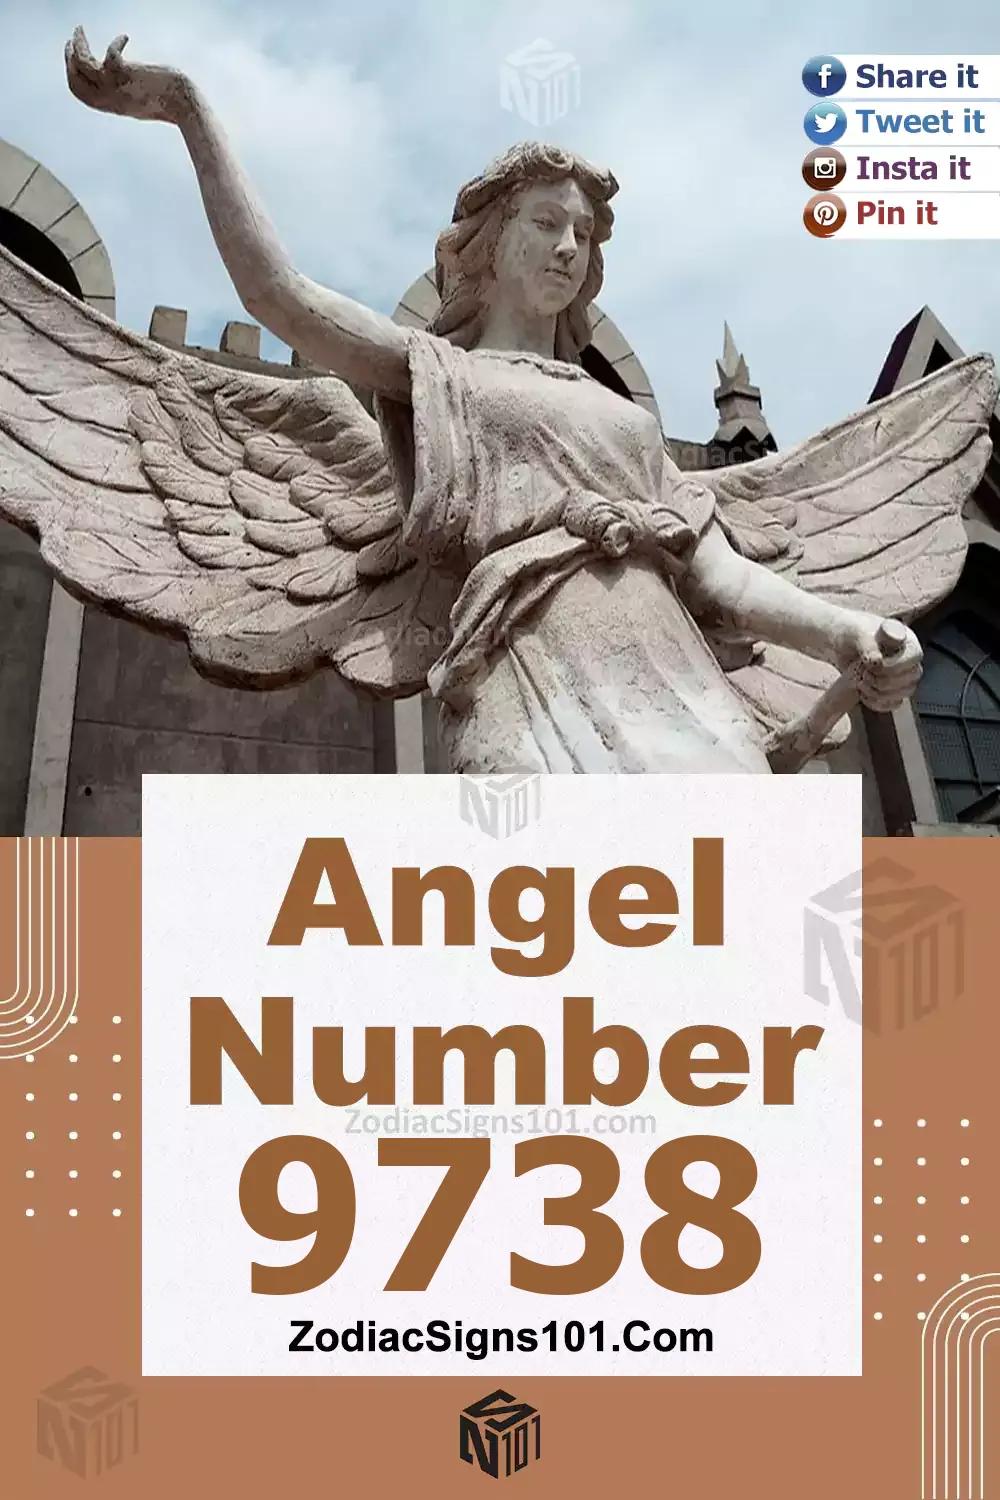 9738 Angel Number Meaning